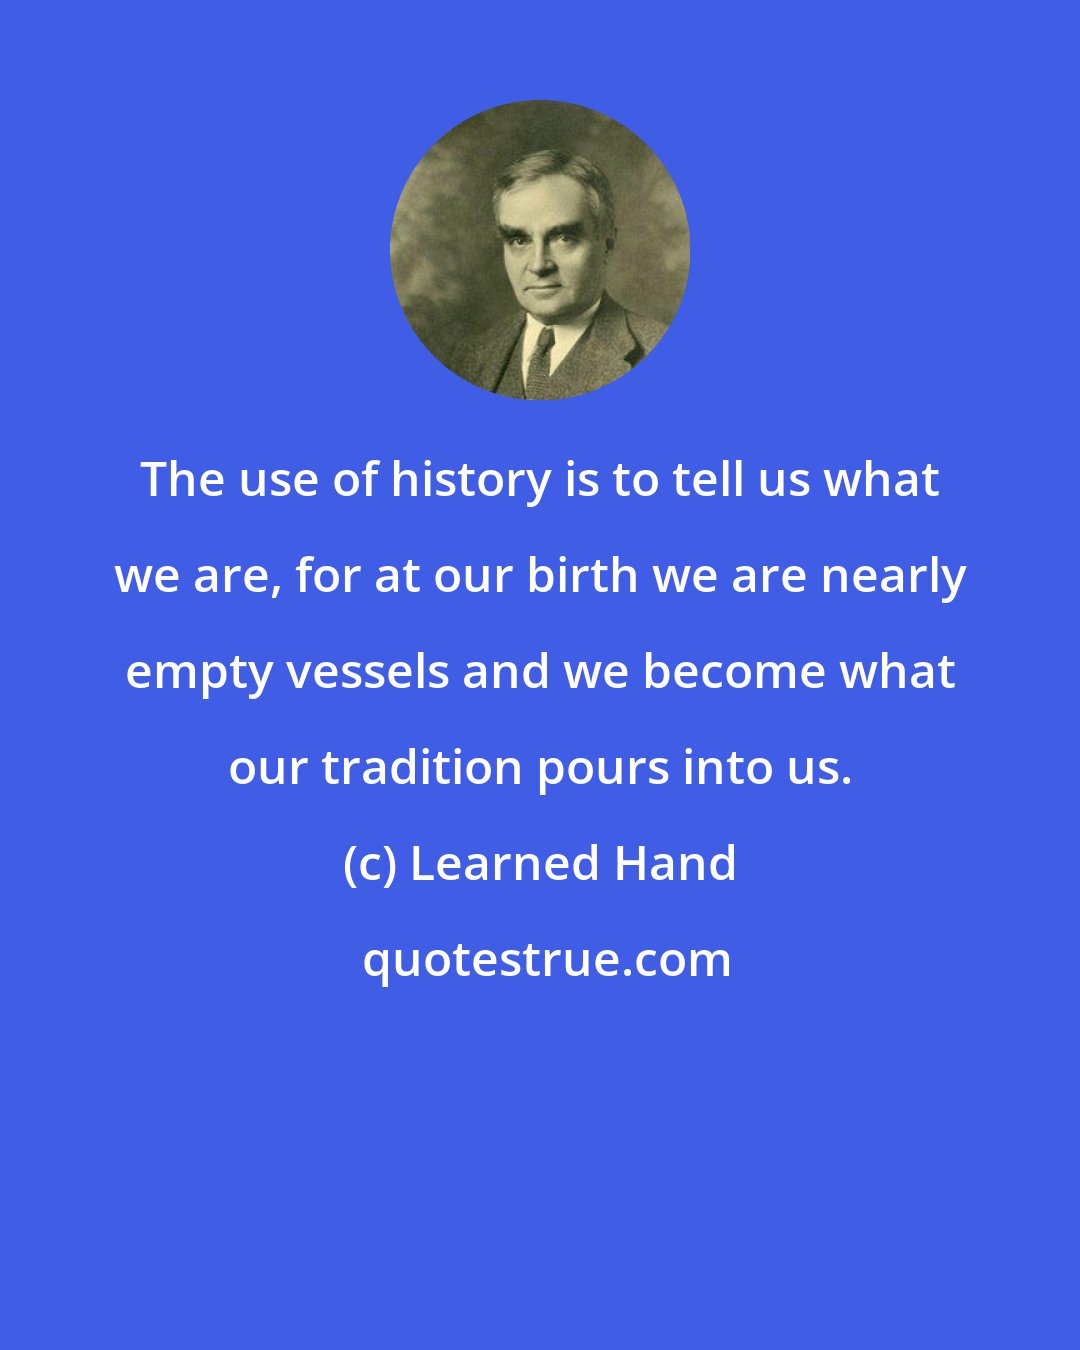 Learned Hand: The use of history is to tell us what we are, for at our birth we are nearly empty vessels and we become what our tradition pours into us.